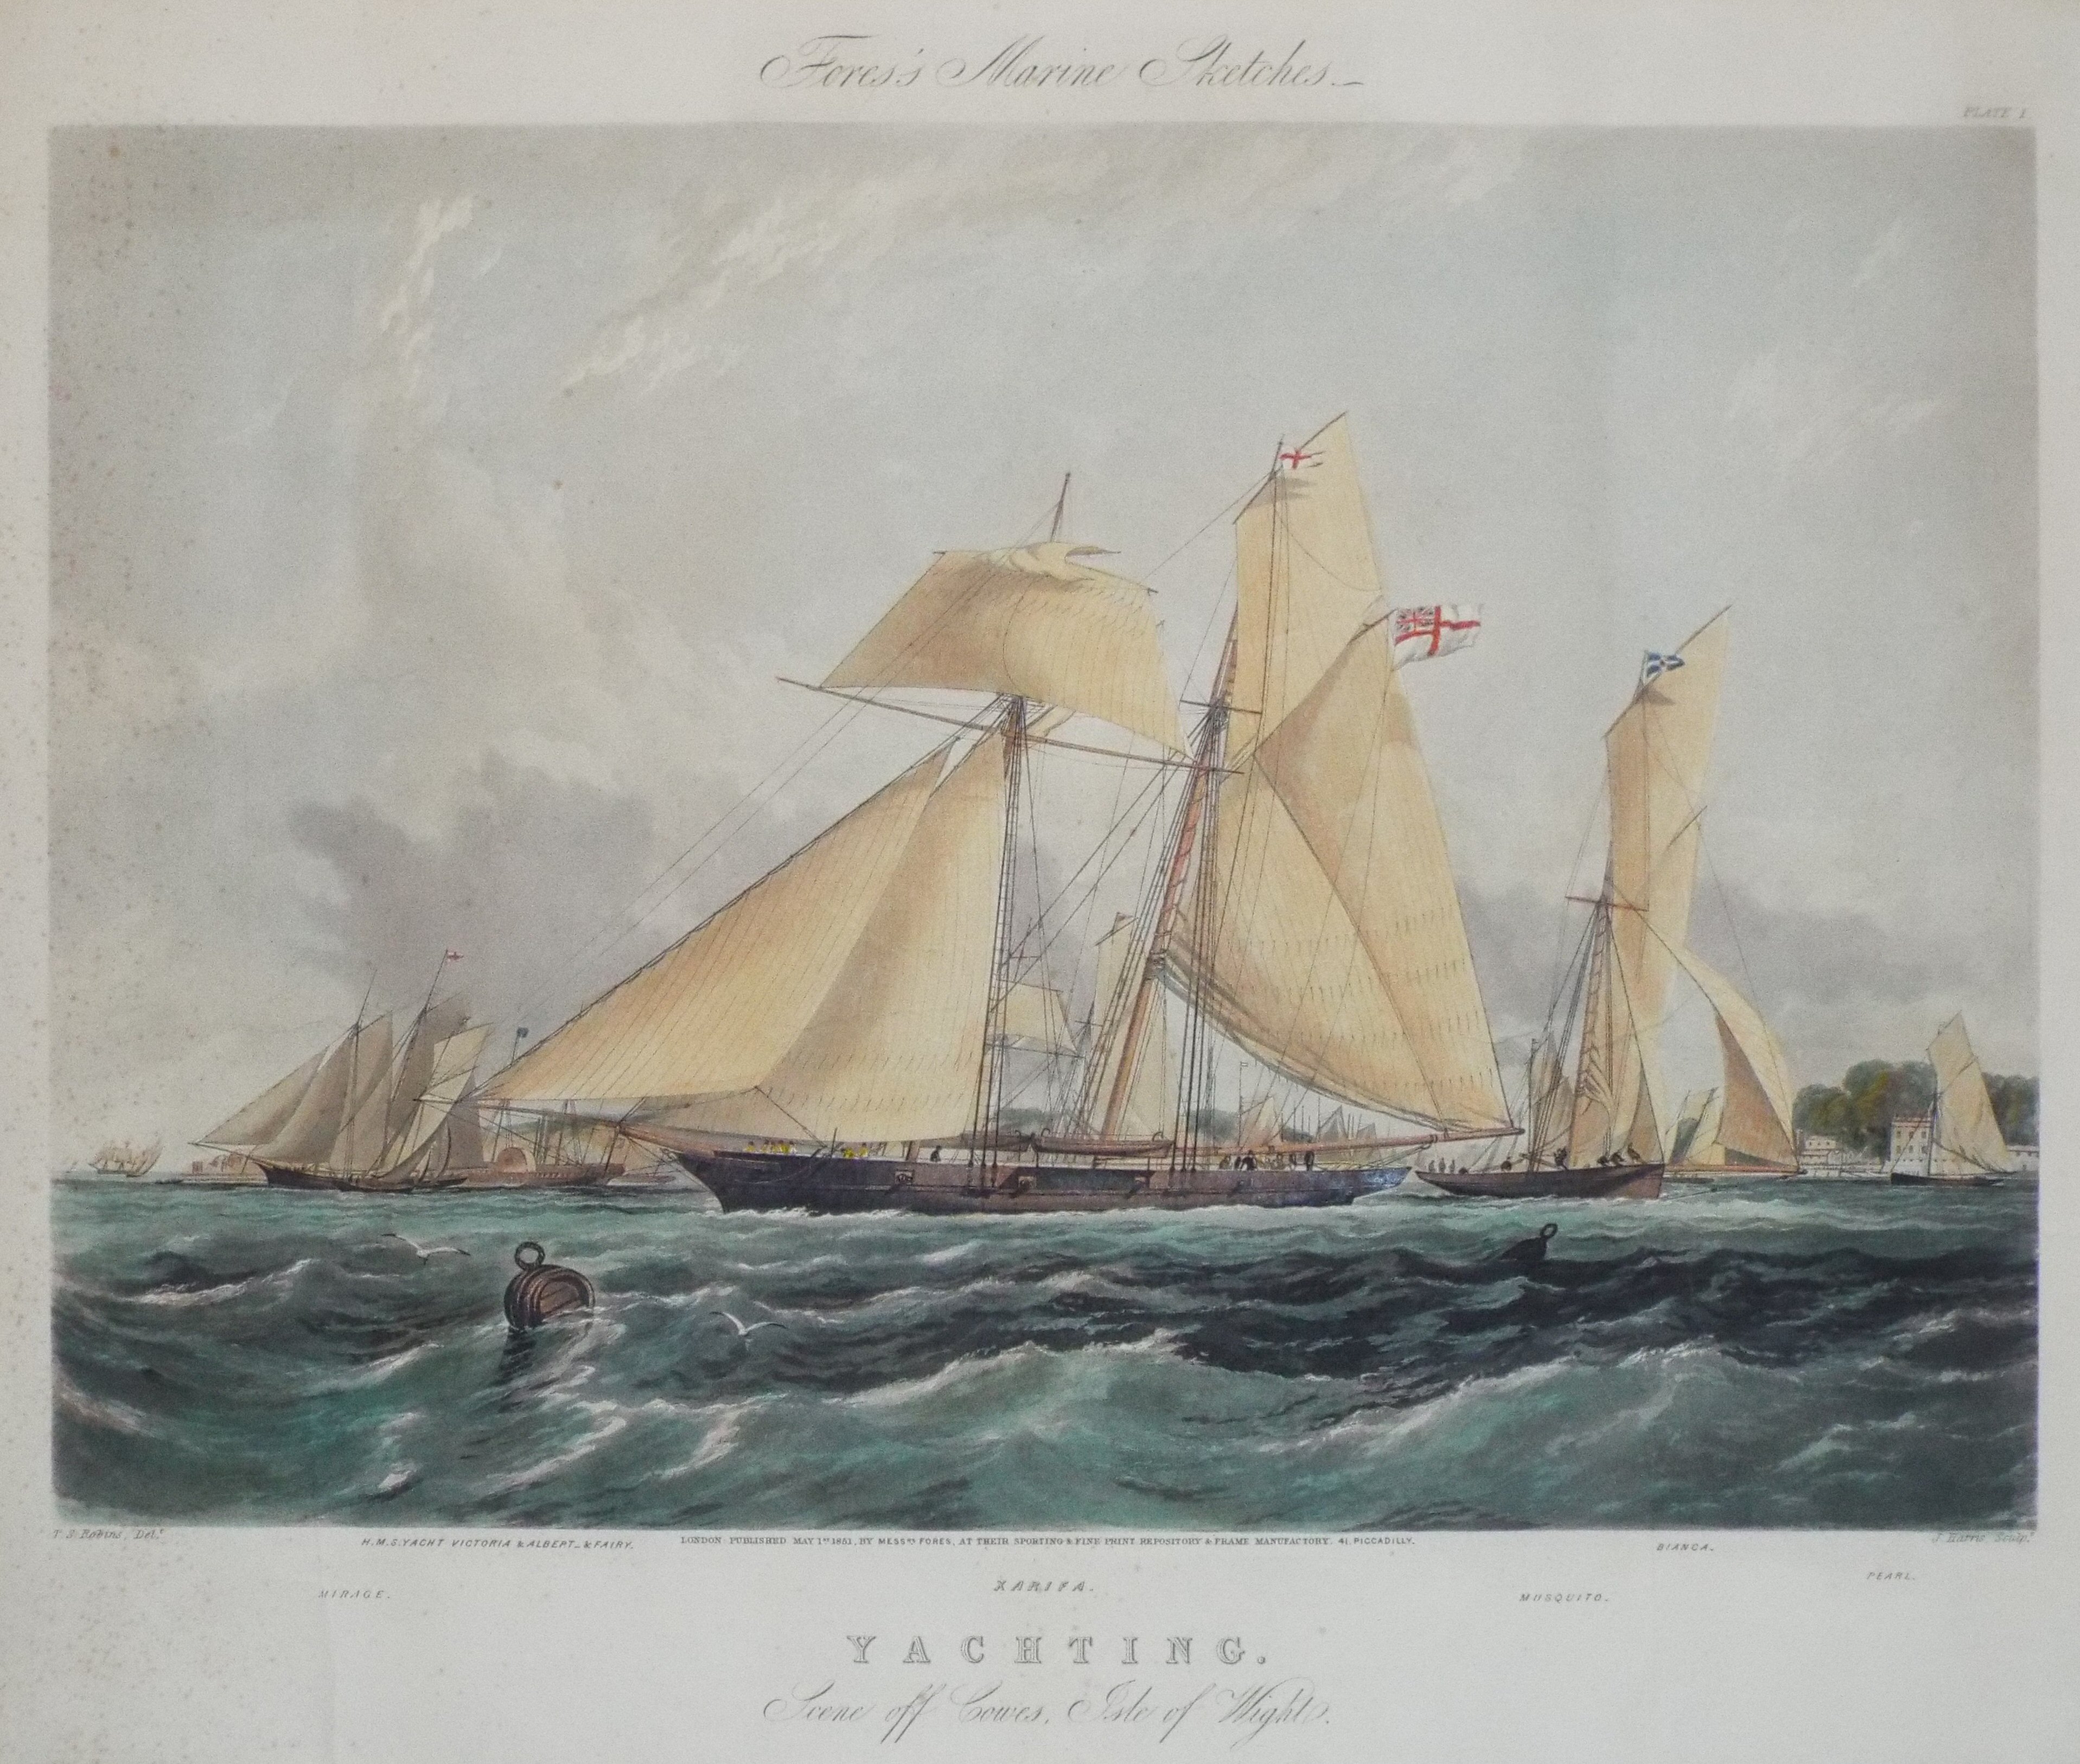 Aquatint - Fores's Marine Sketches. Xarifa. Yachting. Scene off Cowes, Isle of Wight. - Harris